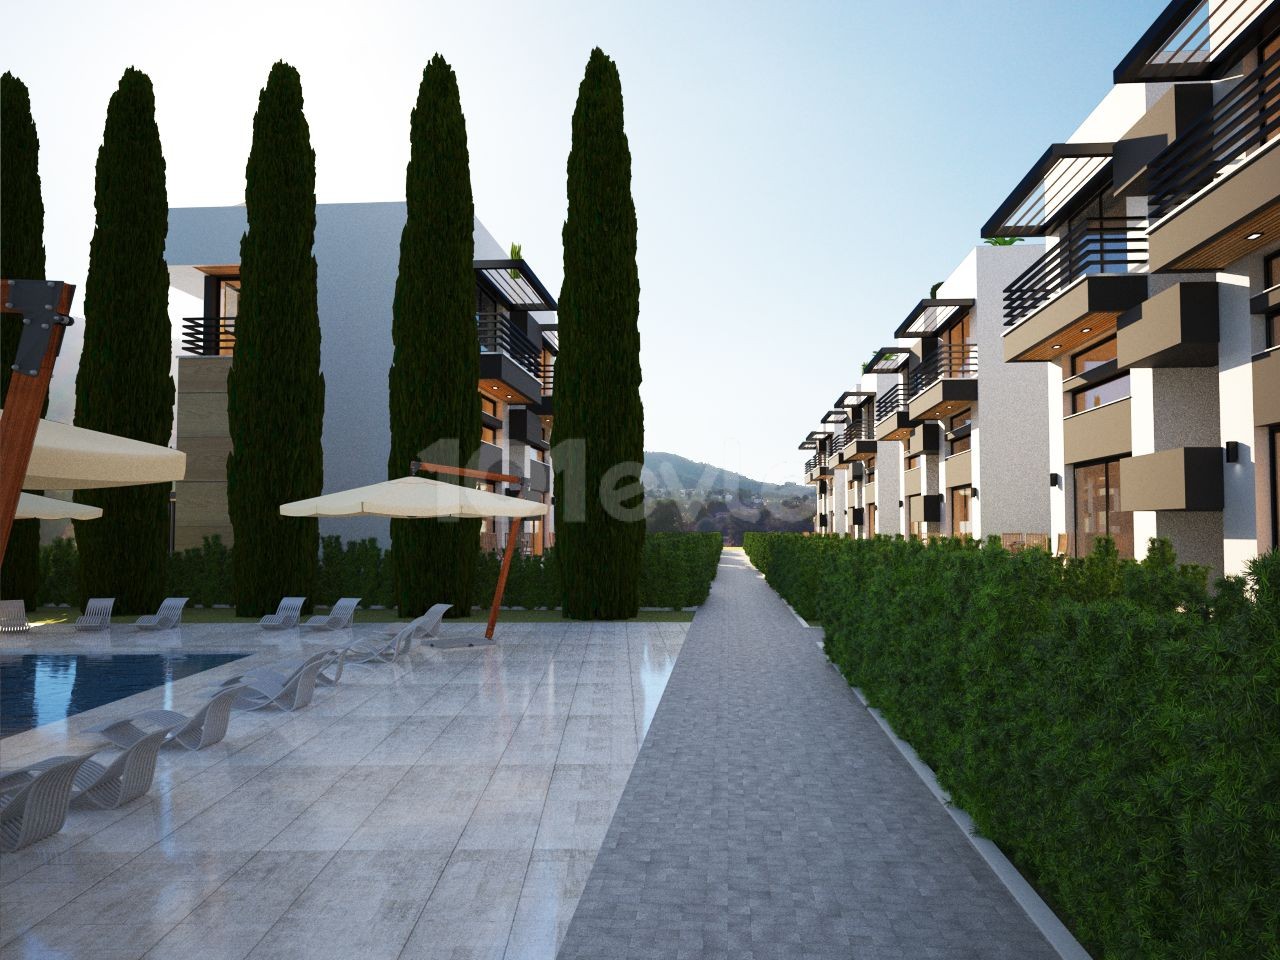 New built 2 bedrooms dublex  and 1 bedroom apt flats with communal swimming pool